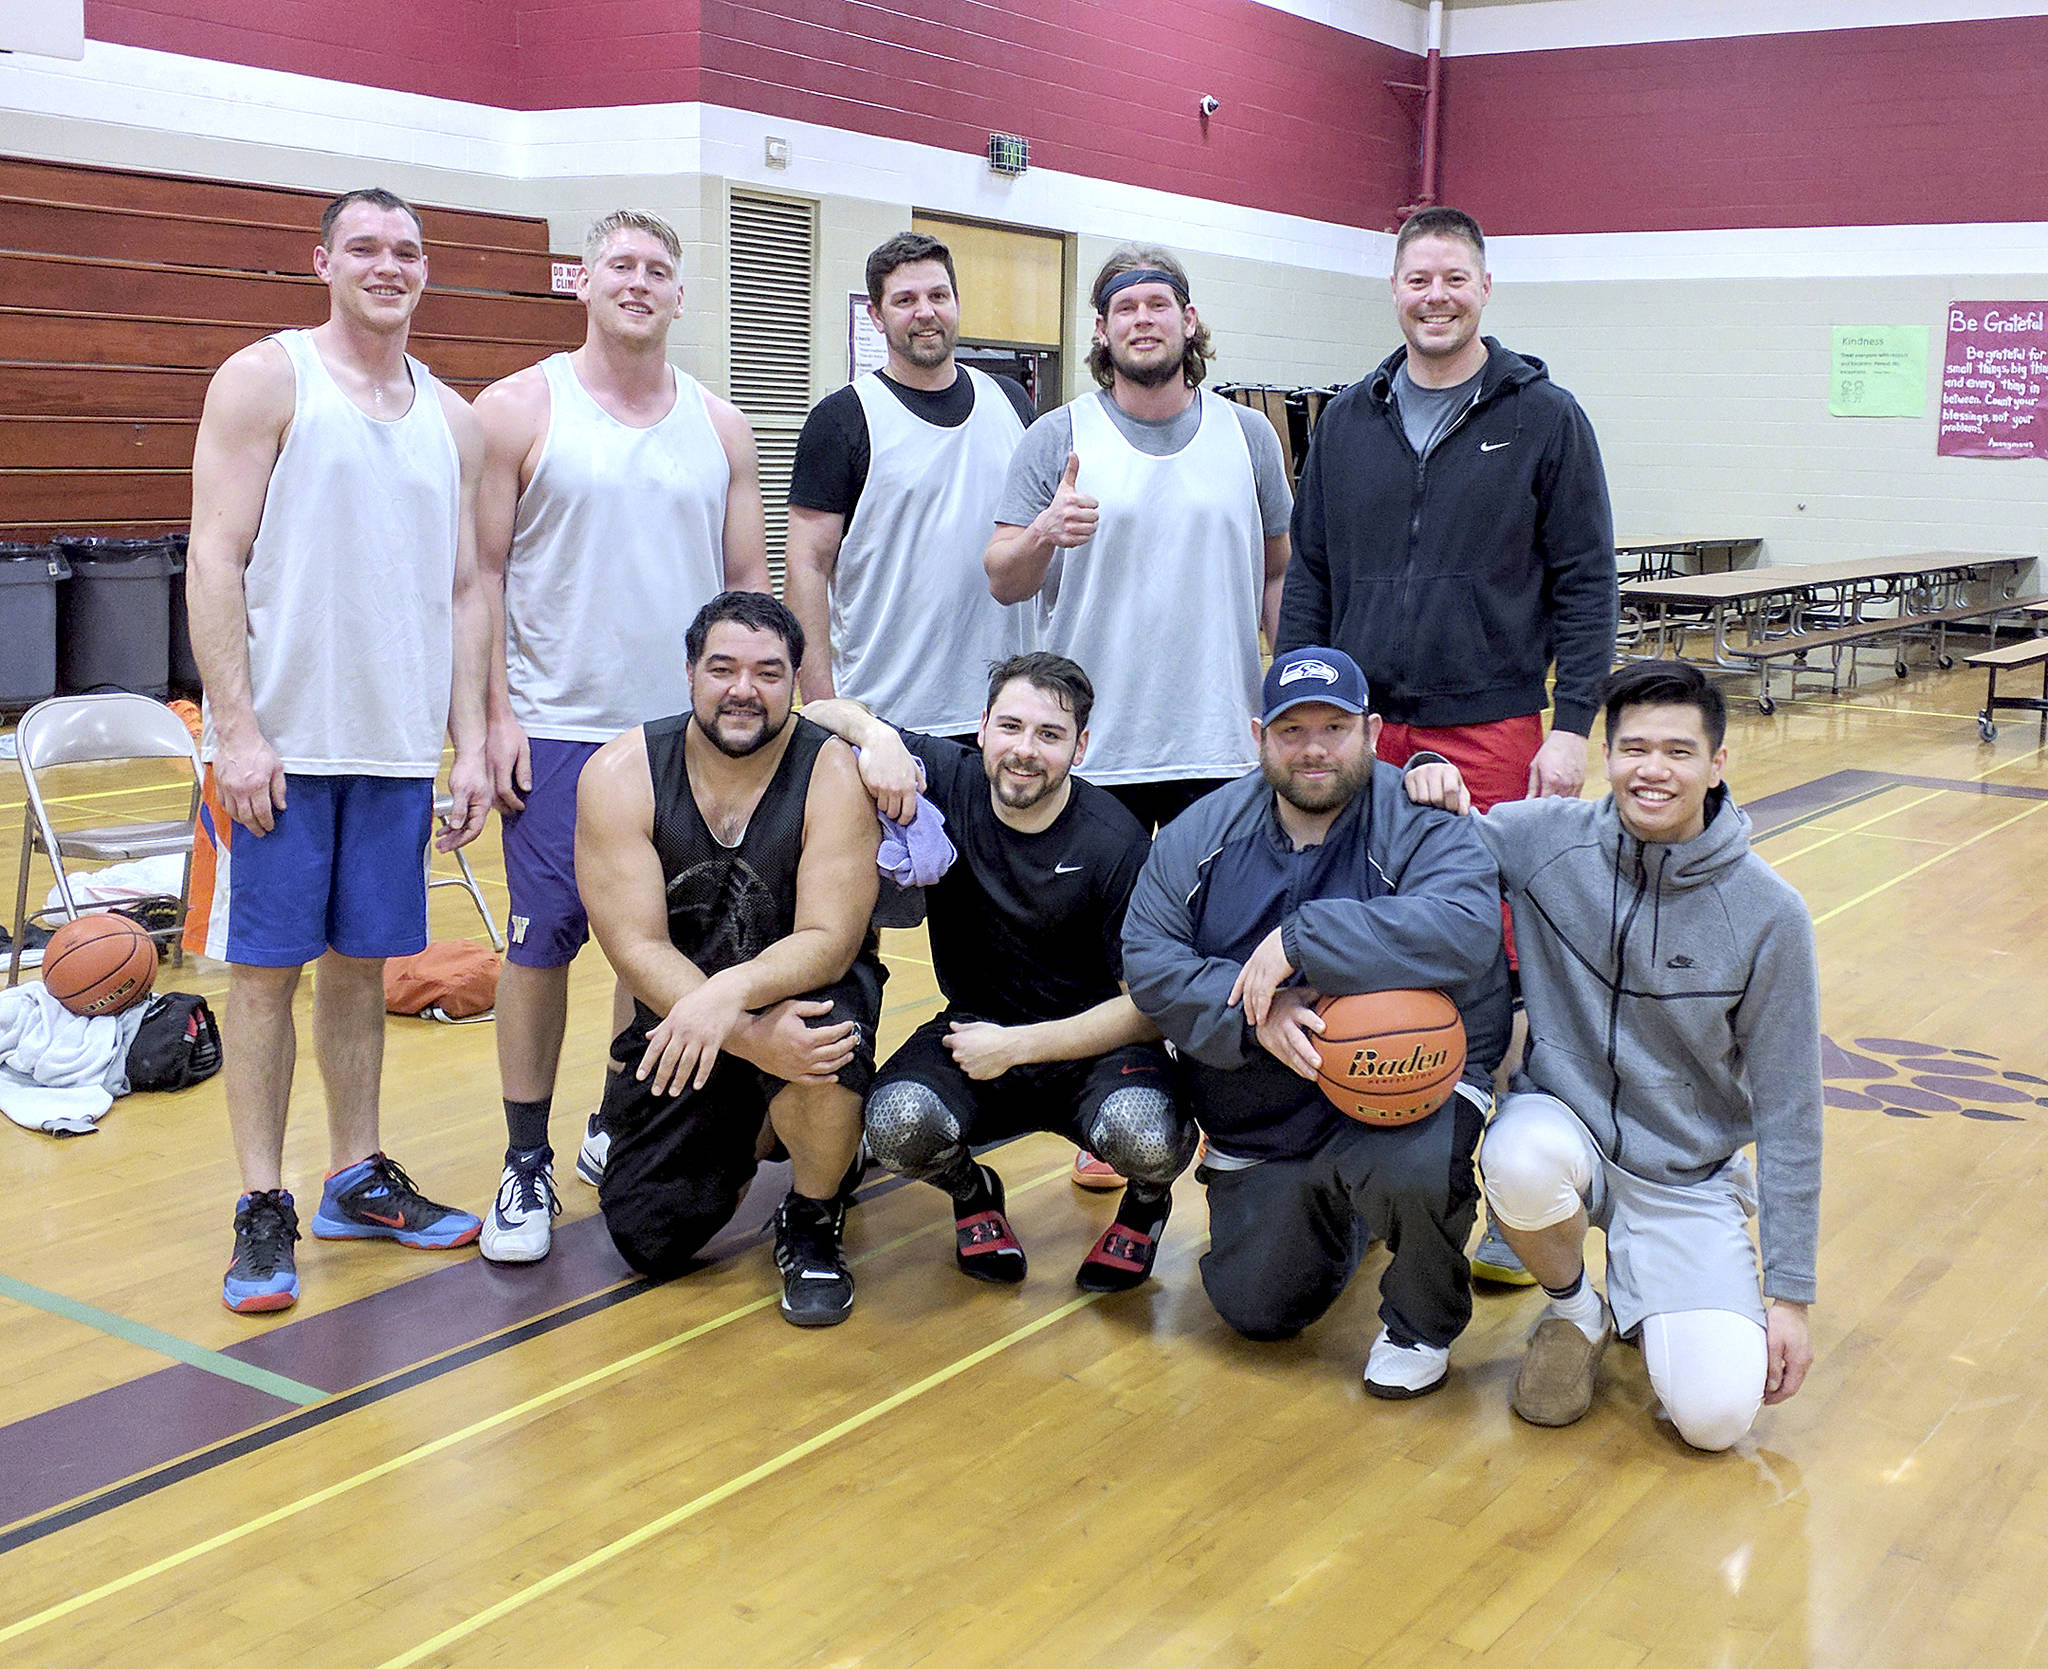 Frank Edward Jones is the winner of the Silver Division championship in the Port Angeles City Basketball League, beating Carlsborg Shell 69-64.